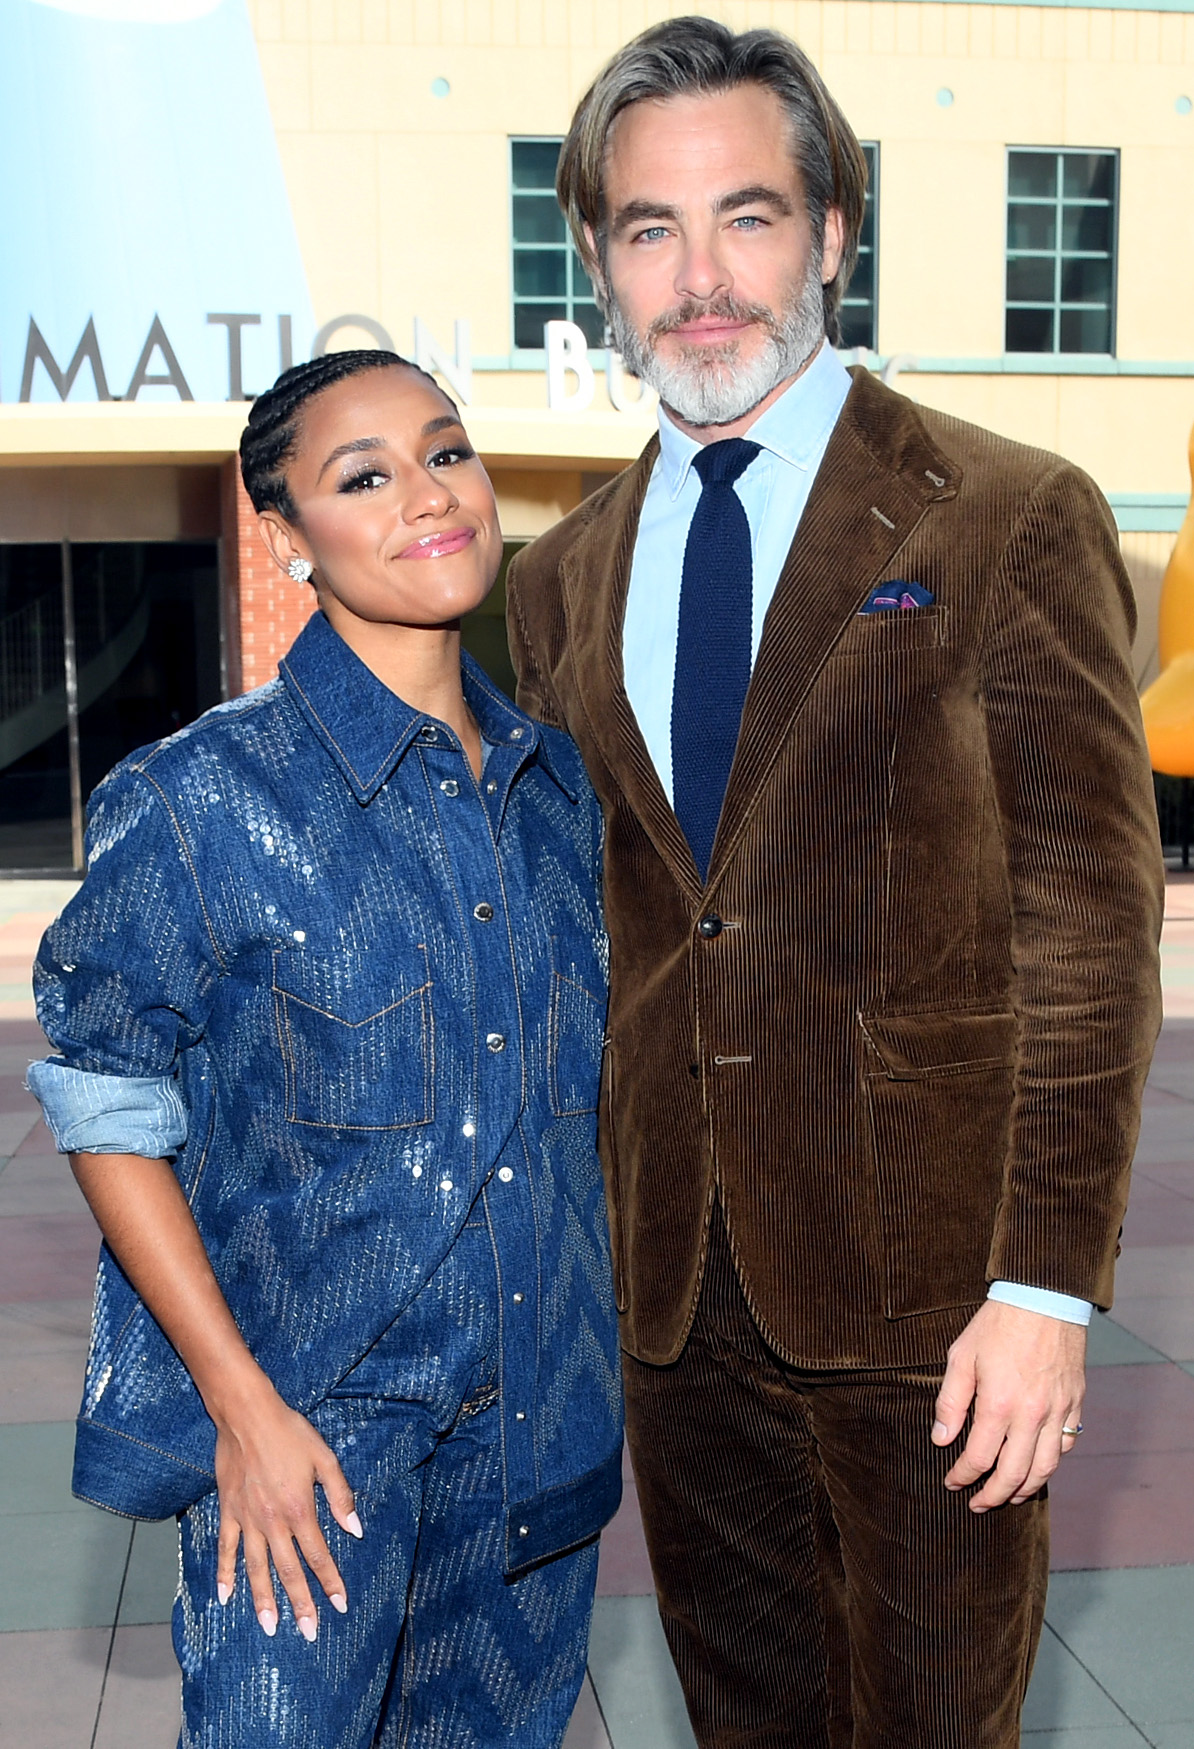 Ariana DeBose and Chris Pine attend a photo call for "Wish" on November 10, 2023, in Hollywood, California. | Source: Getty Images